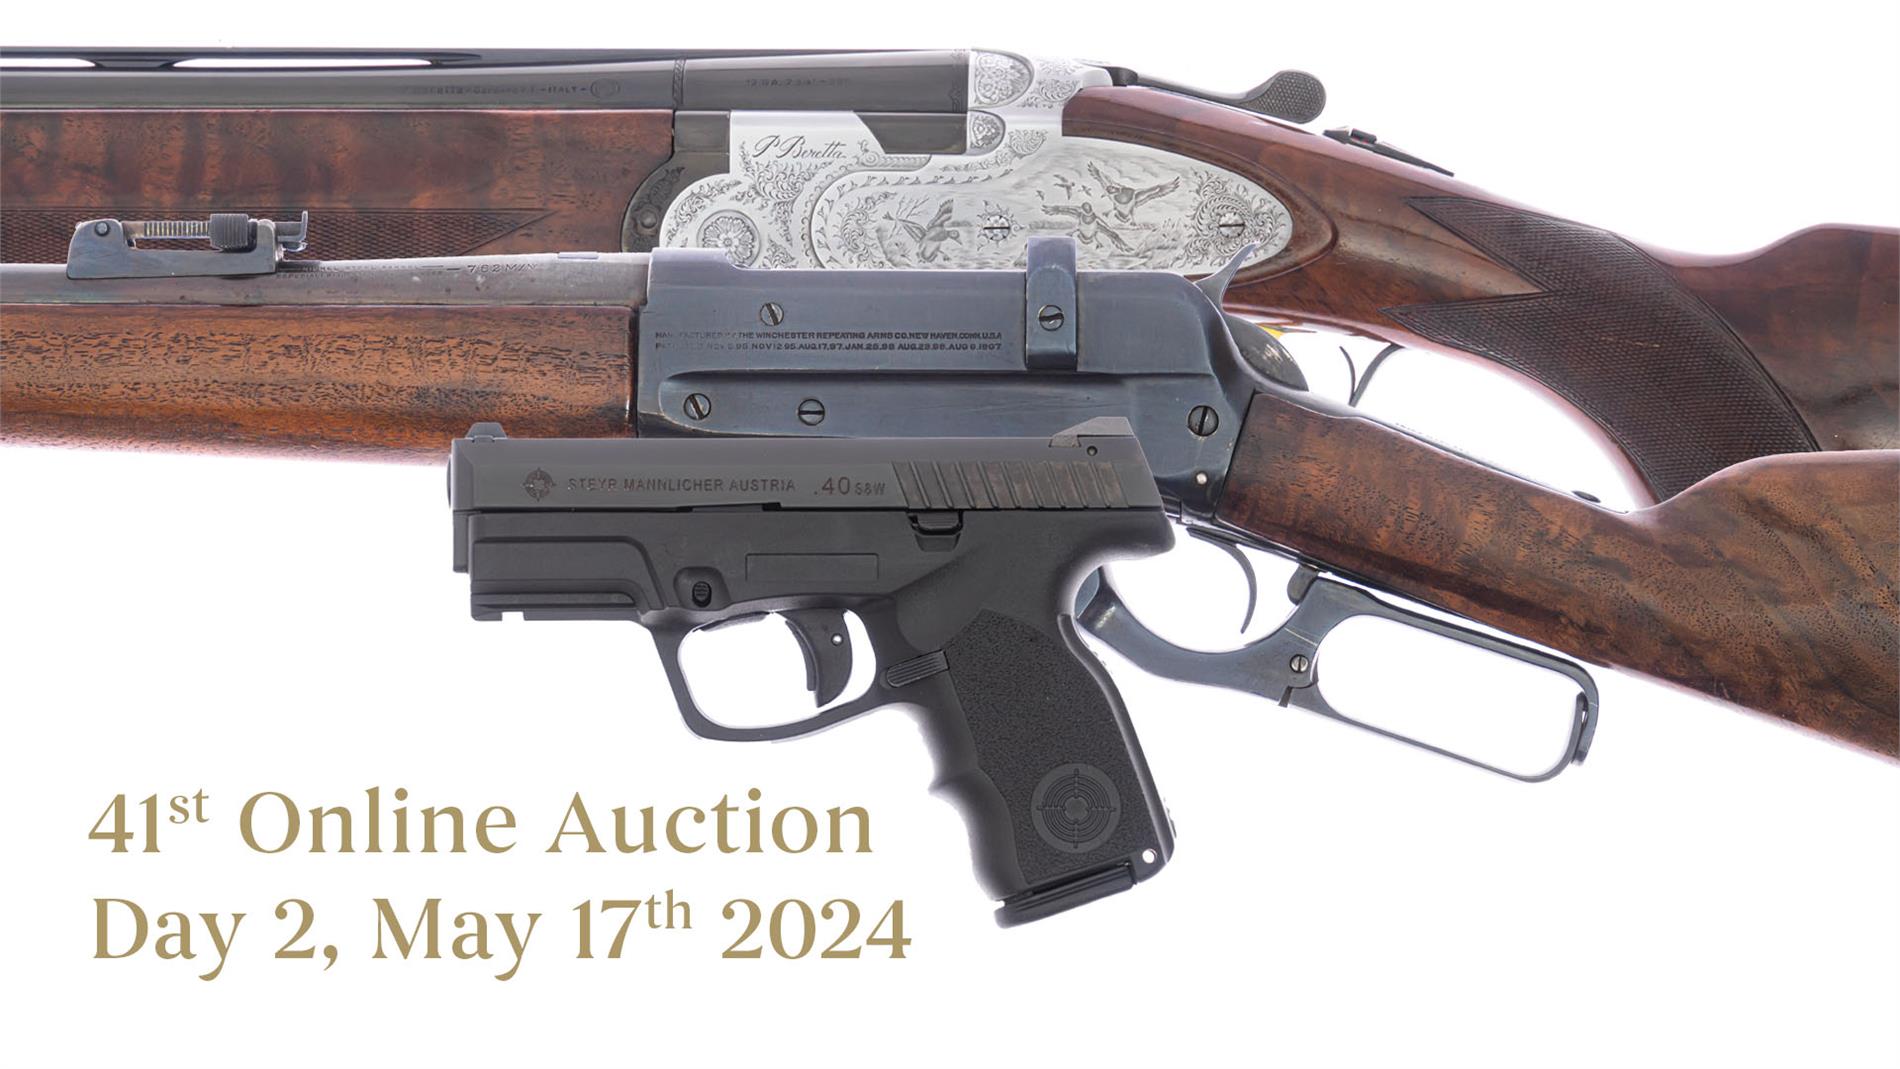 41st Classic Auction - Online Day (Day 2)